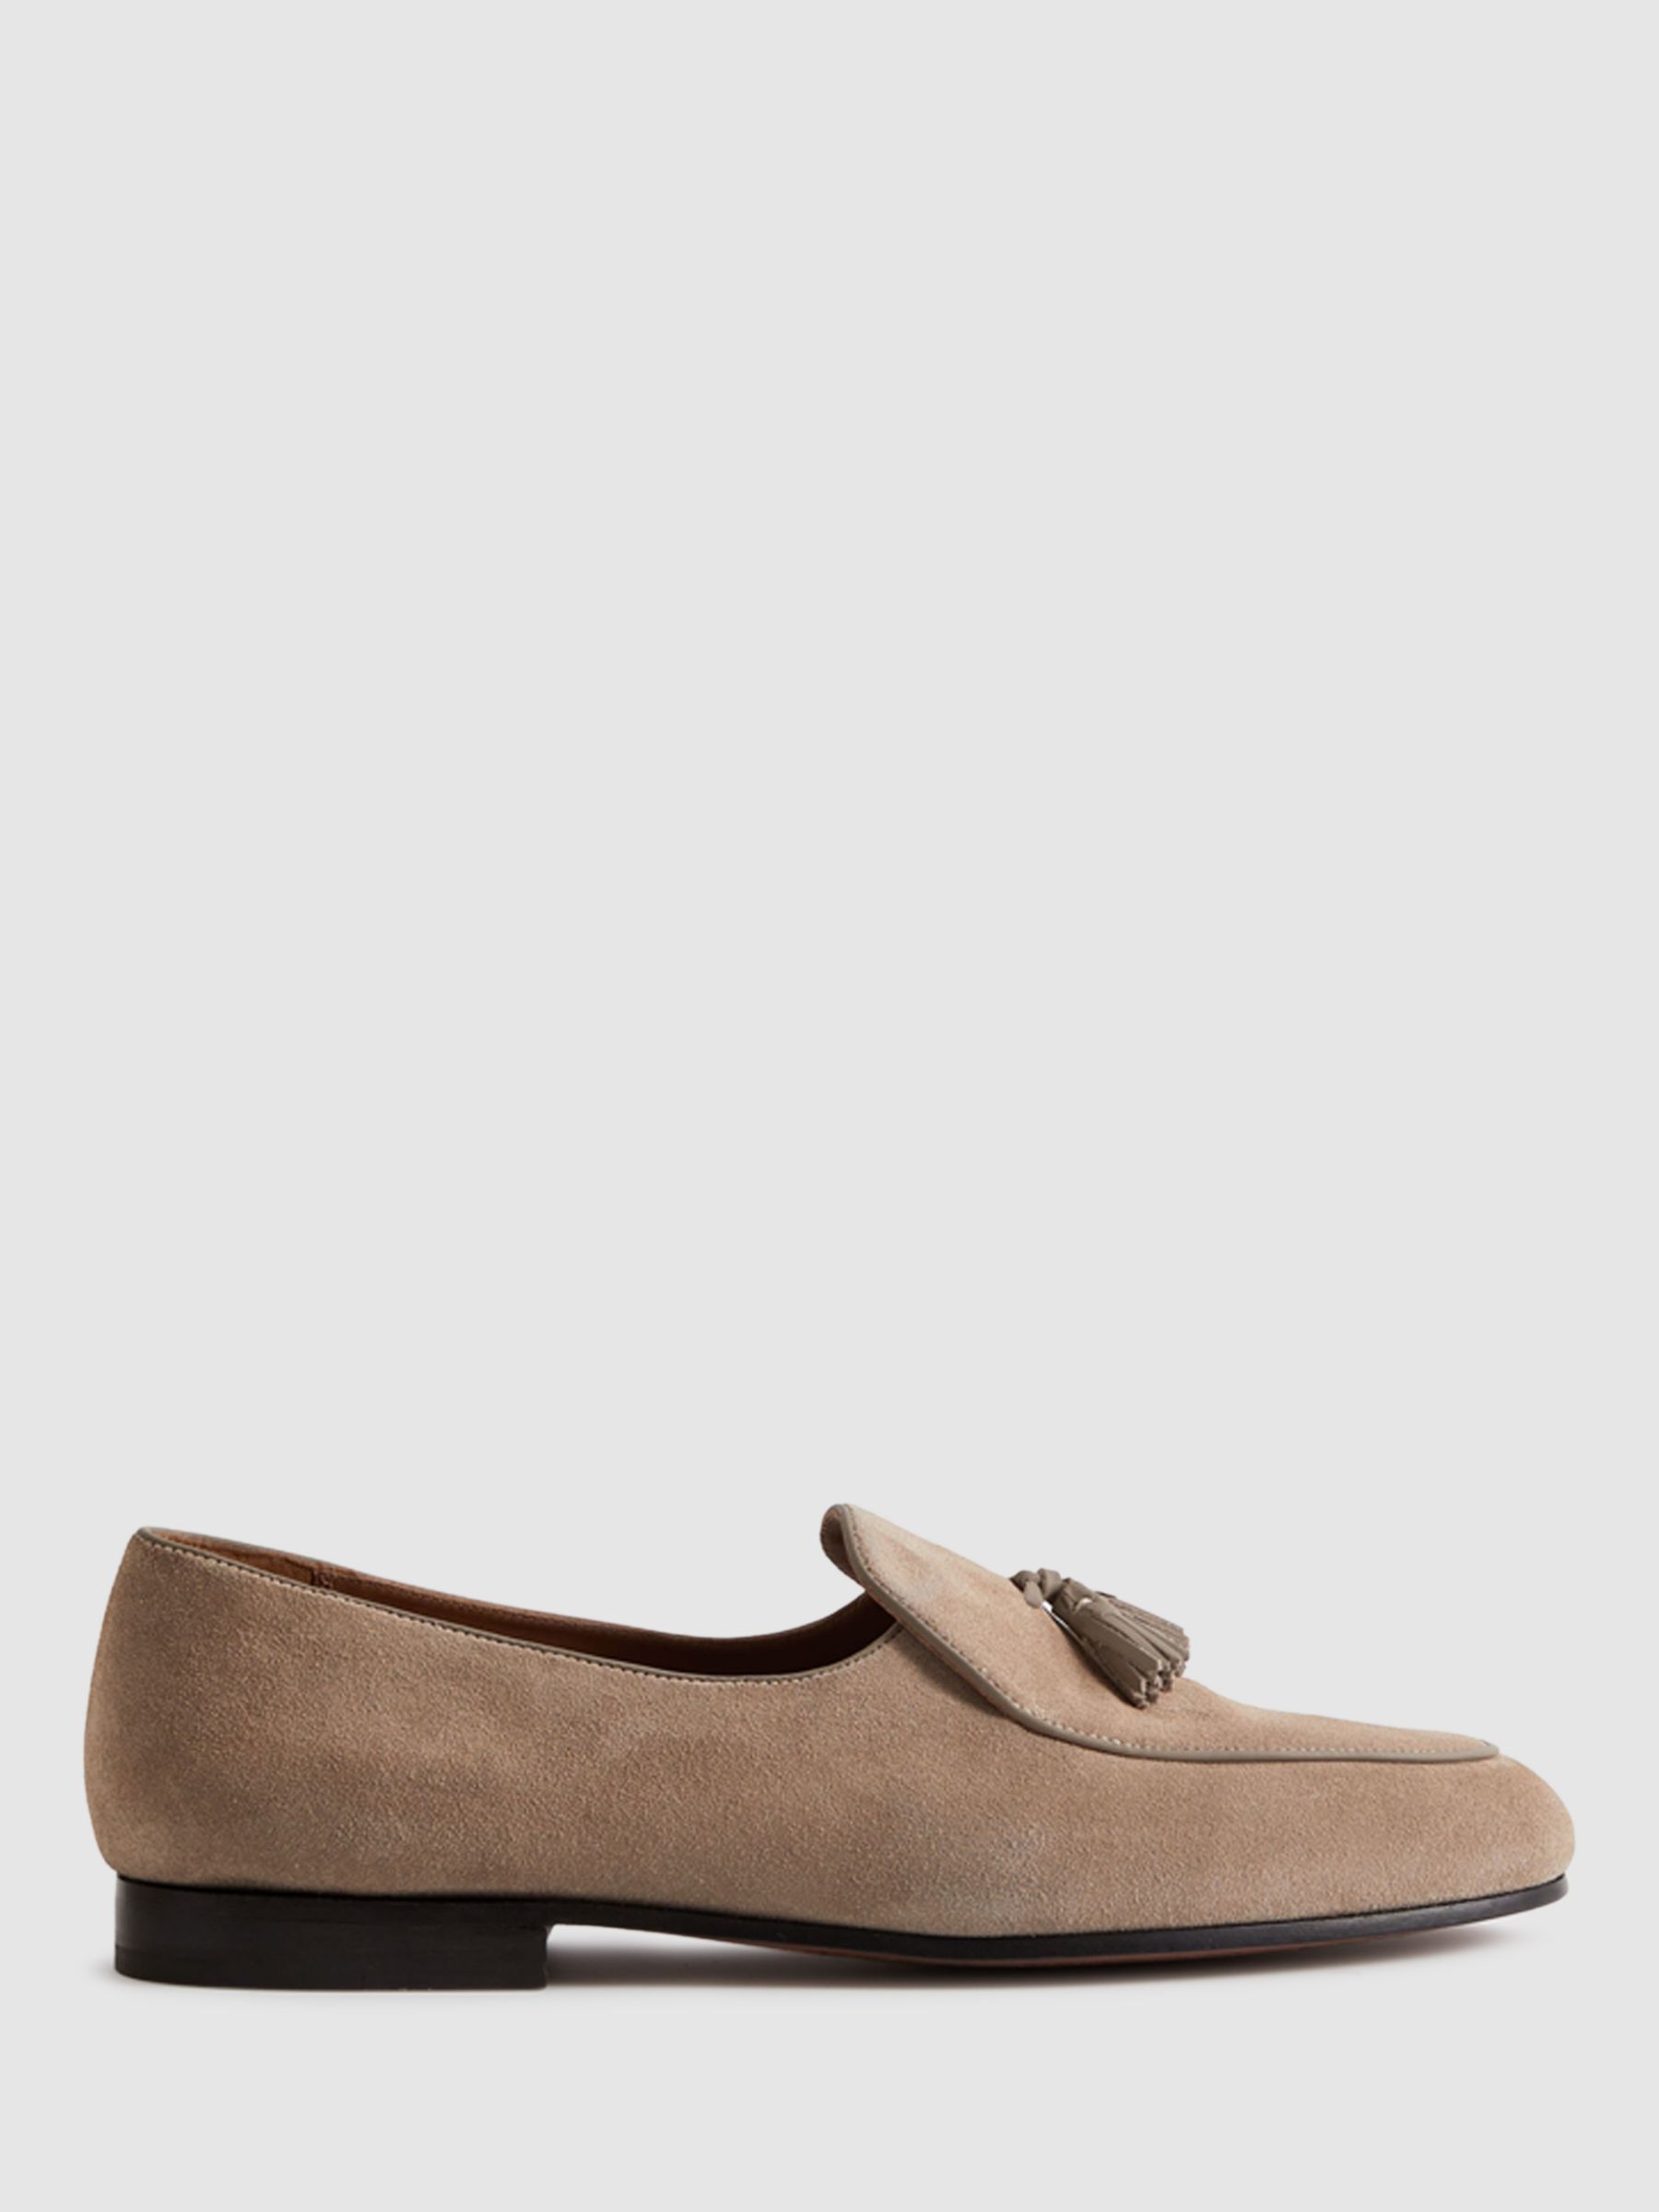 Reiss Harry Leather Tassel Loafers, Taupe, 7